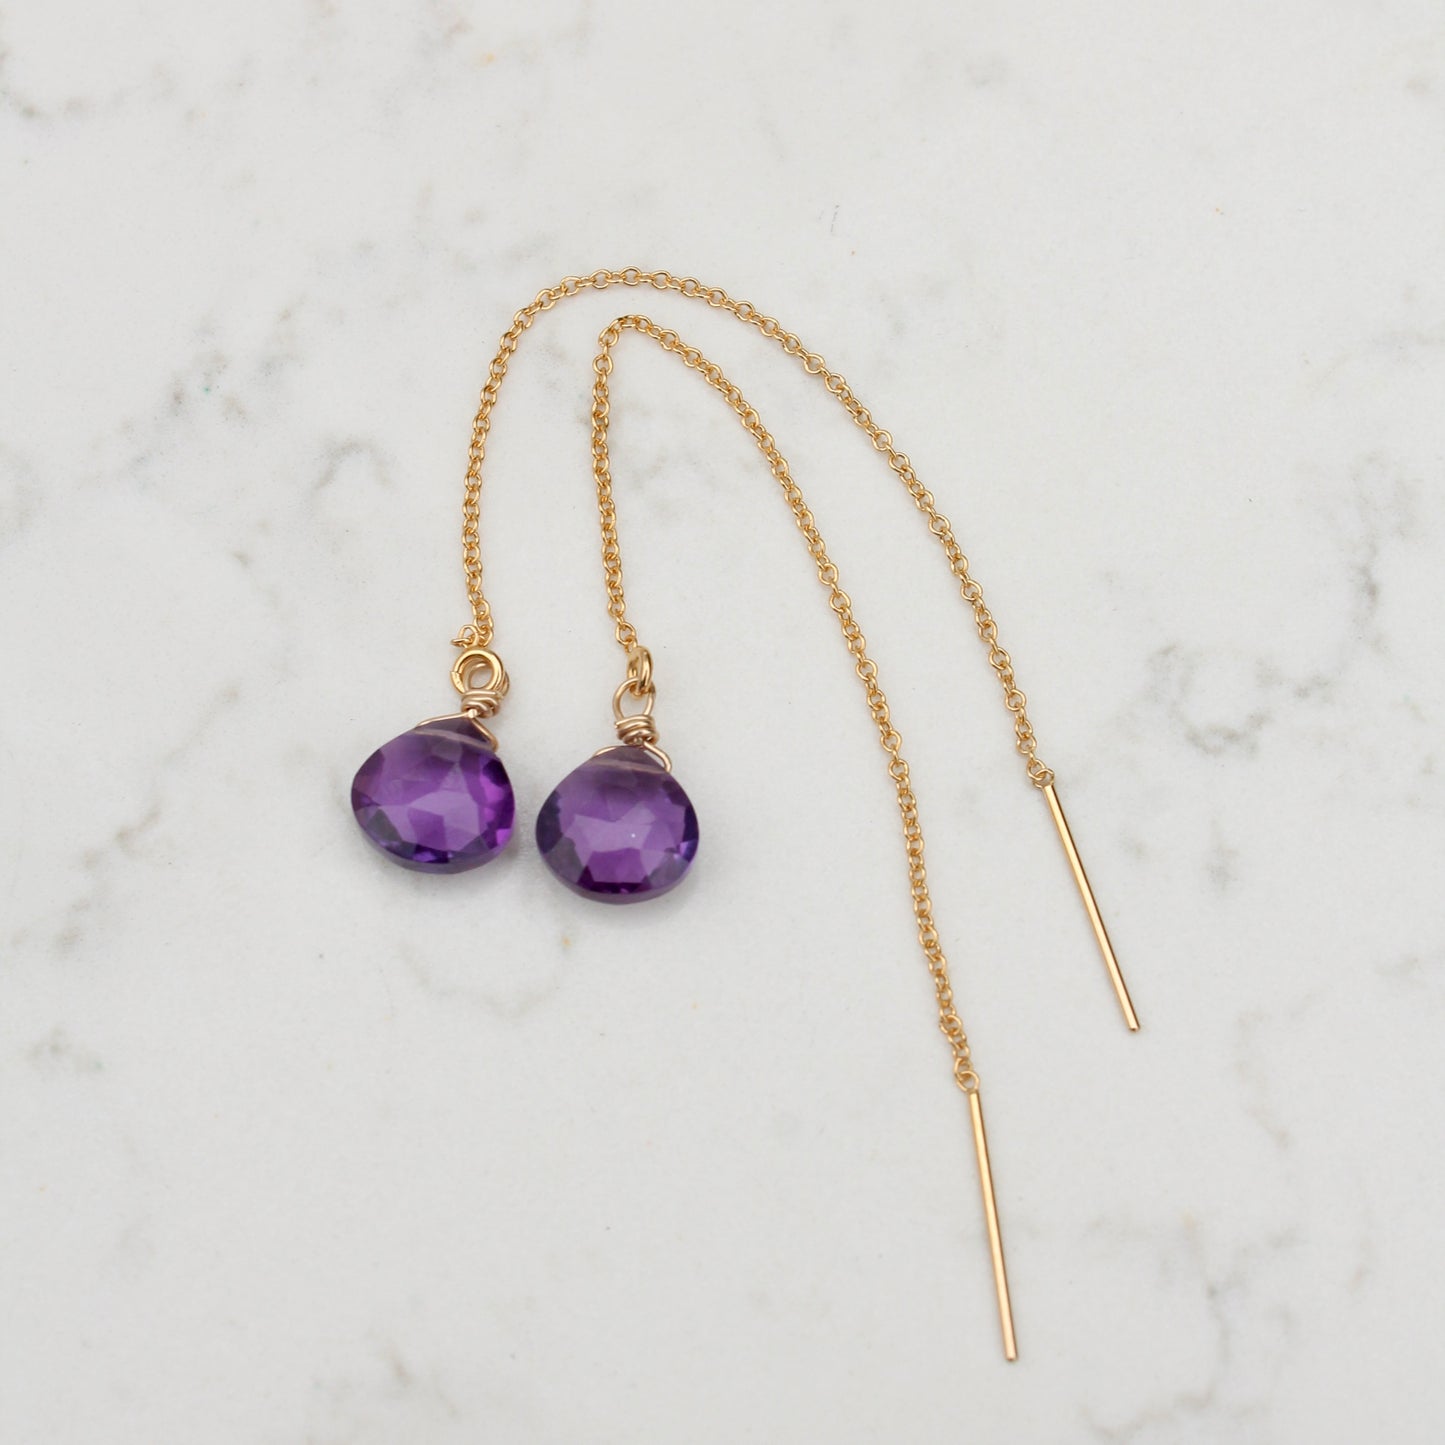 Gold Filled Chain Threader with Gemstone Dangles